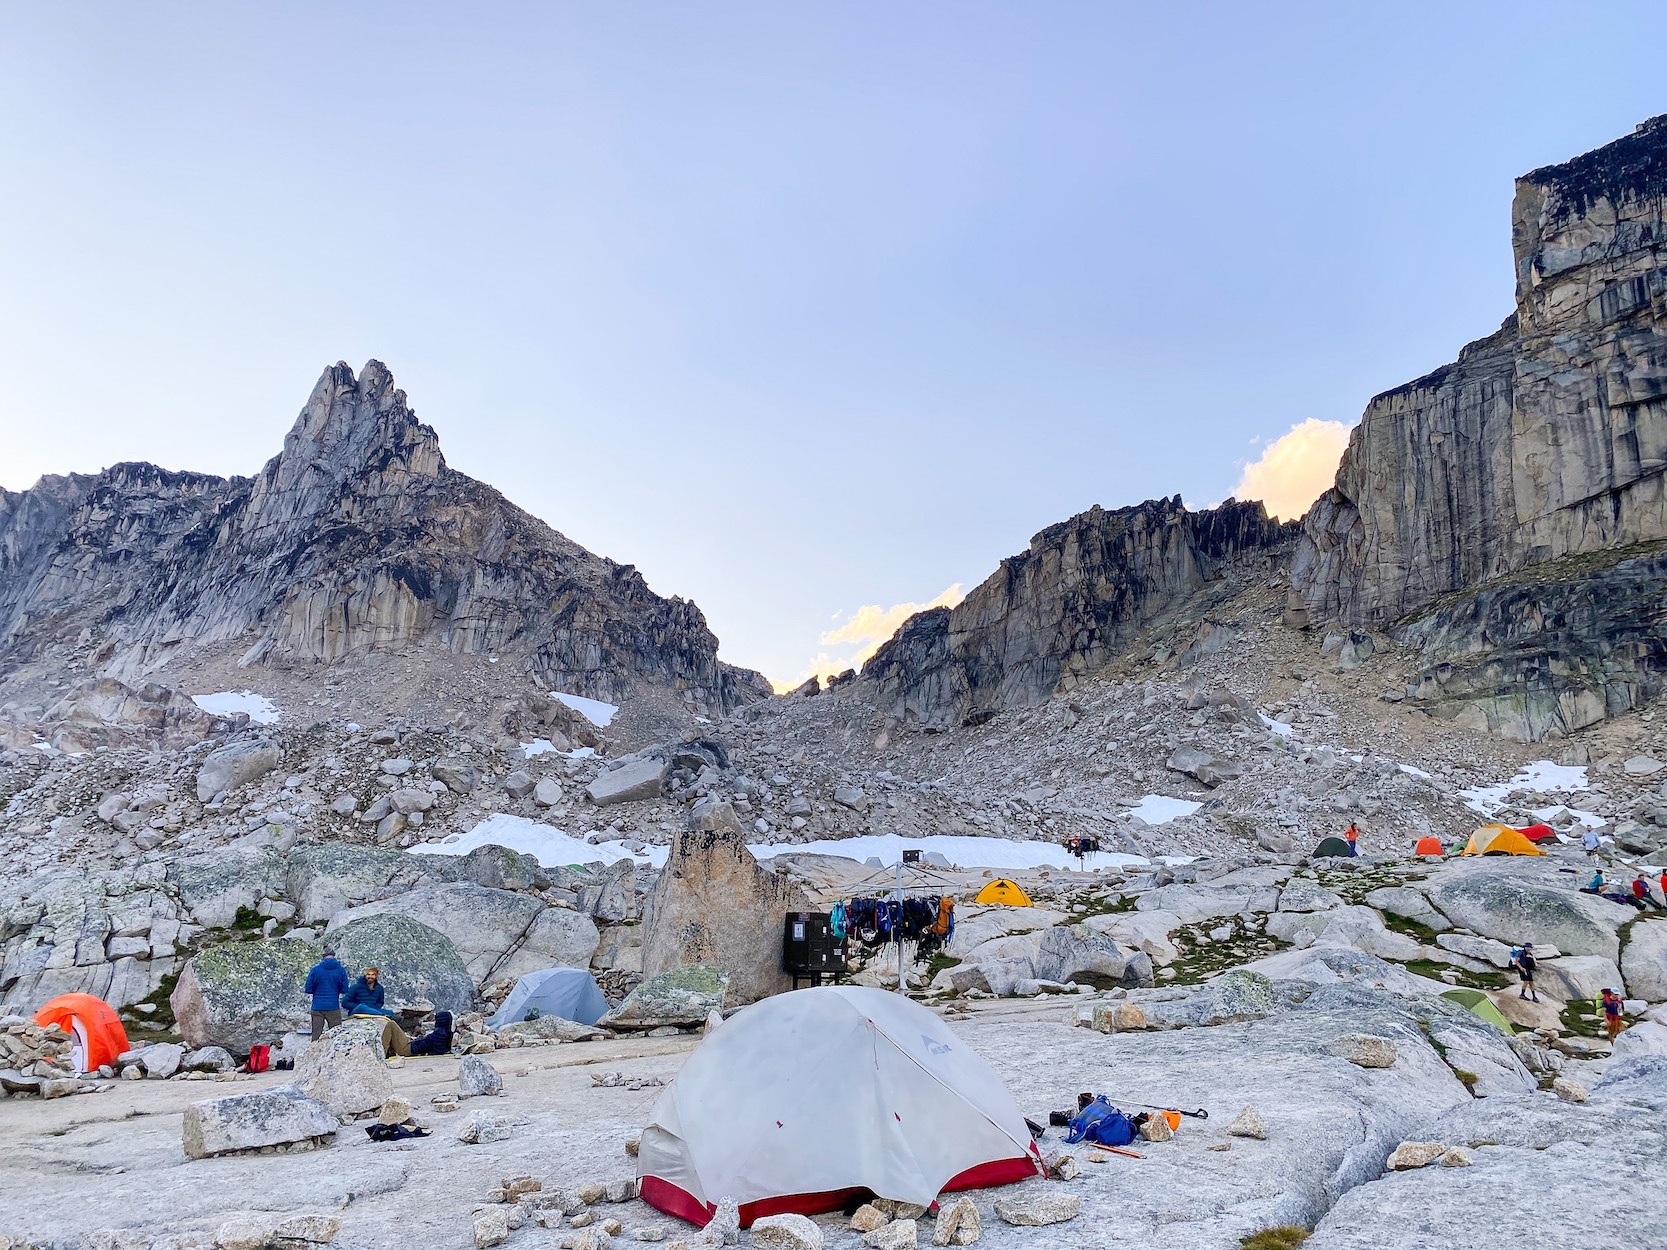 The Appleebee dome campground with many tents and some climbers relaxing